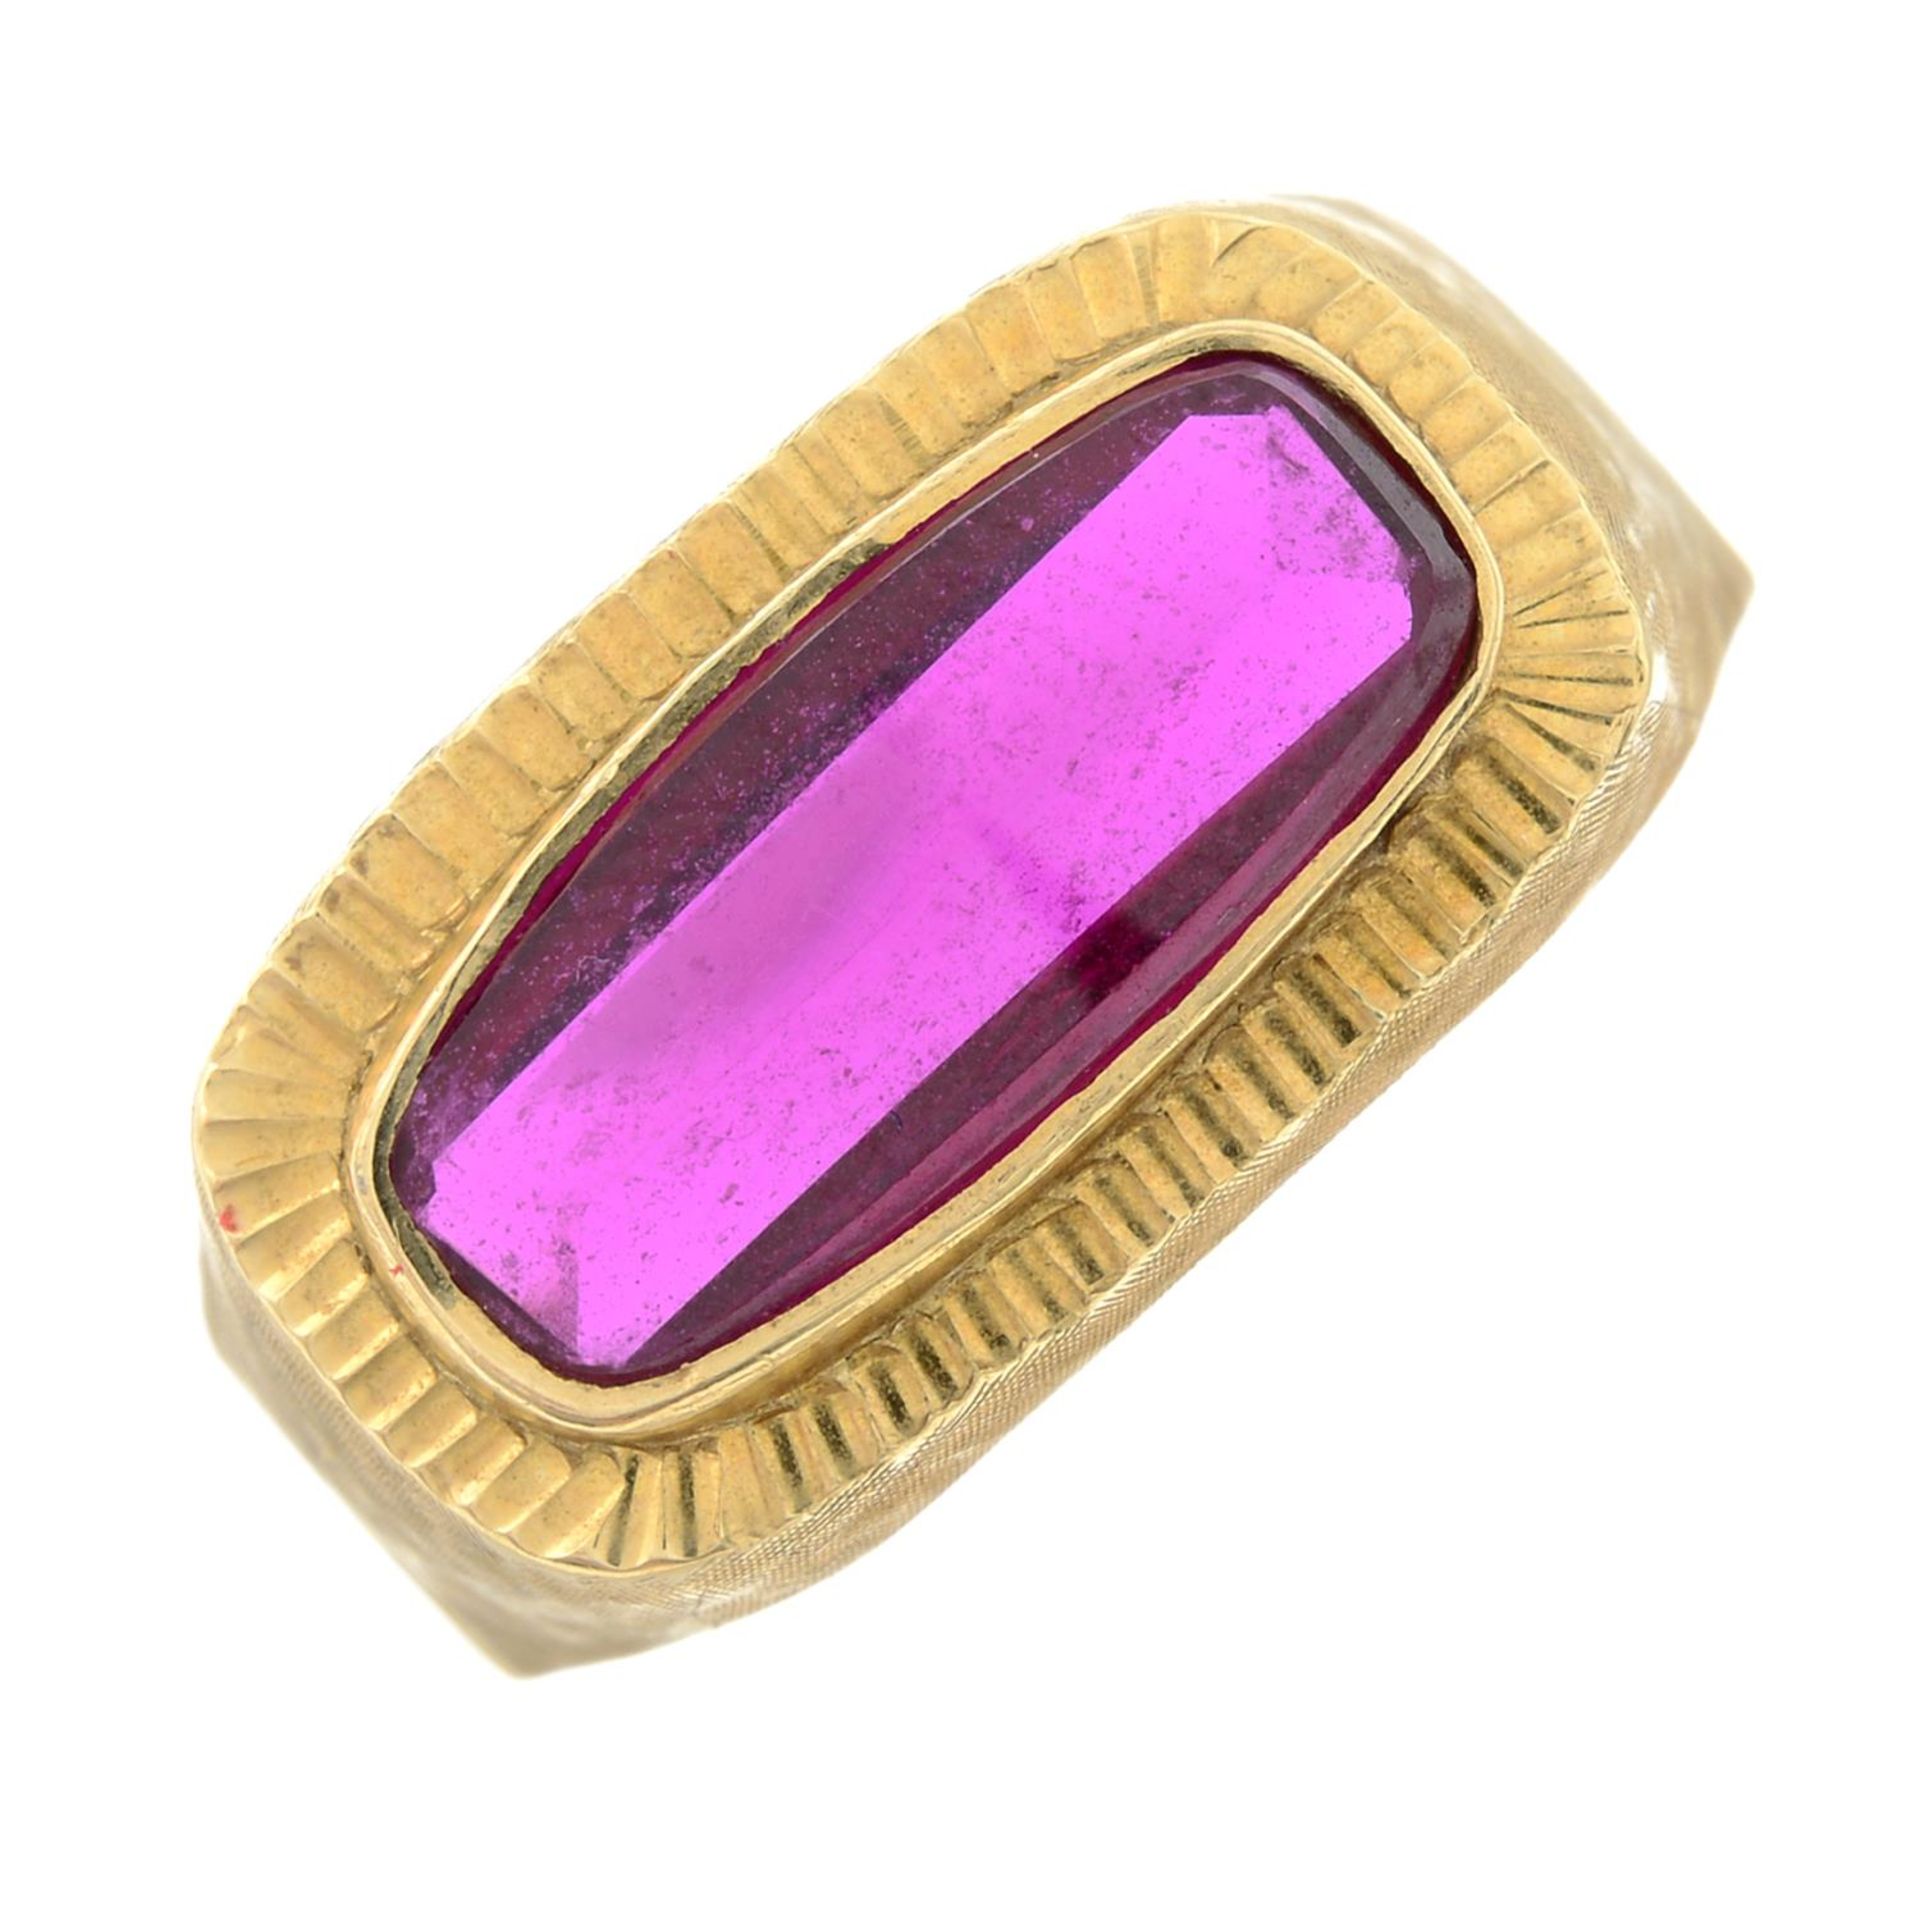 A synthetic ruby dress ring.